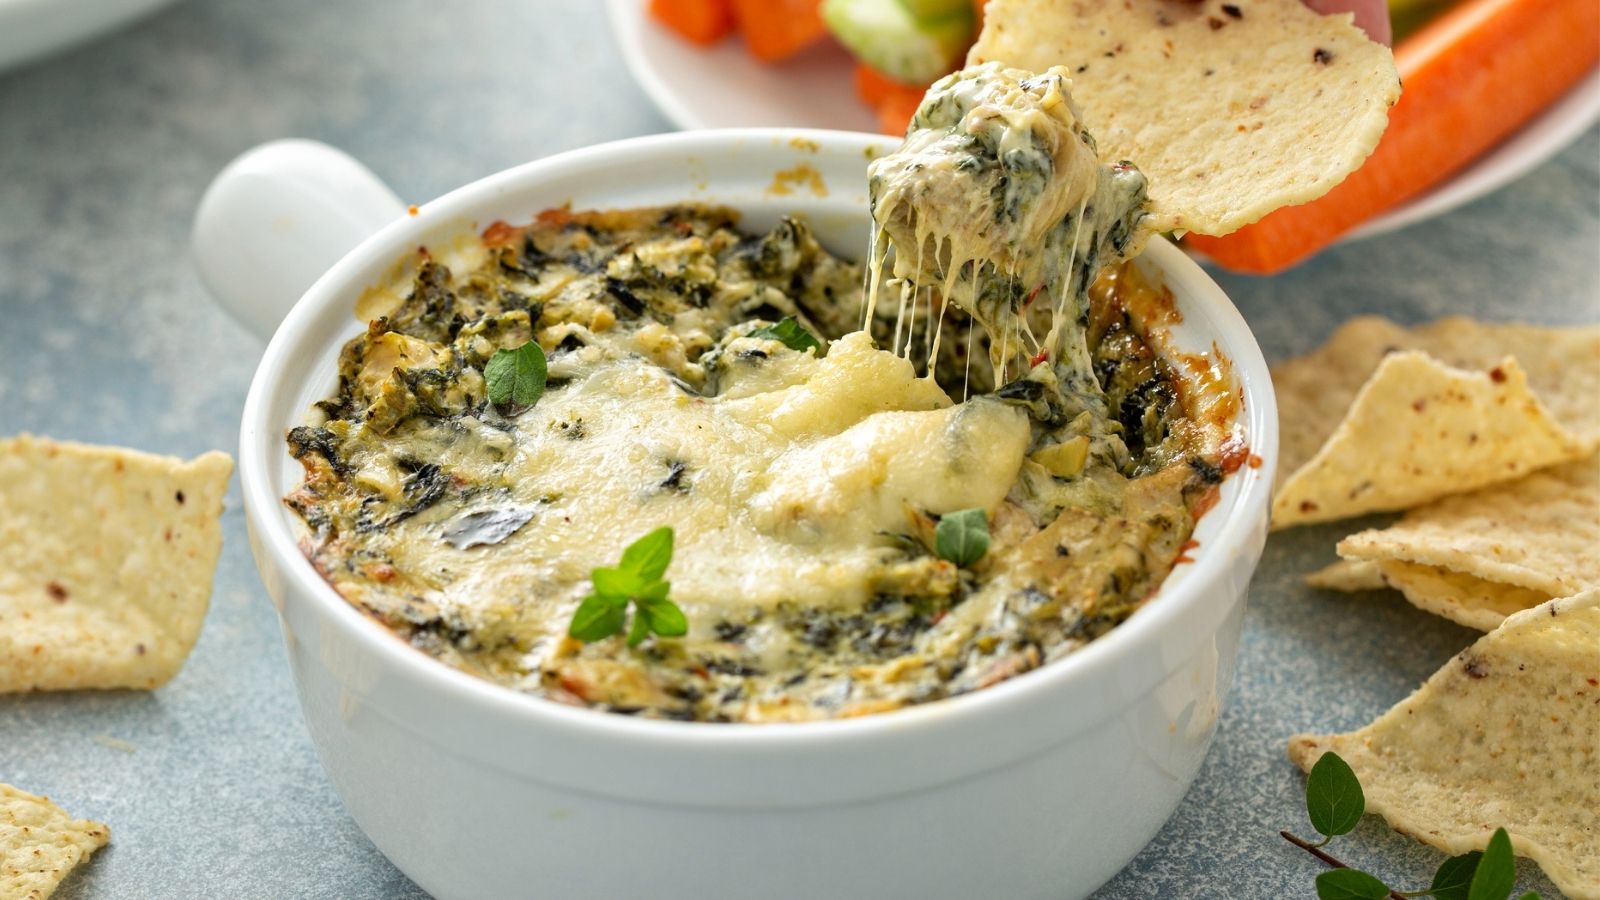 Discover Spinach’s Versatility with These 24 Recipes